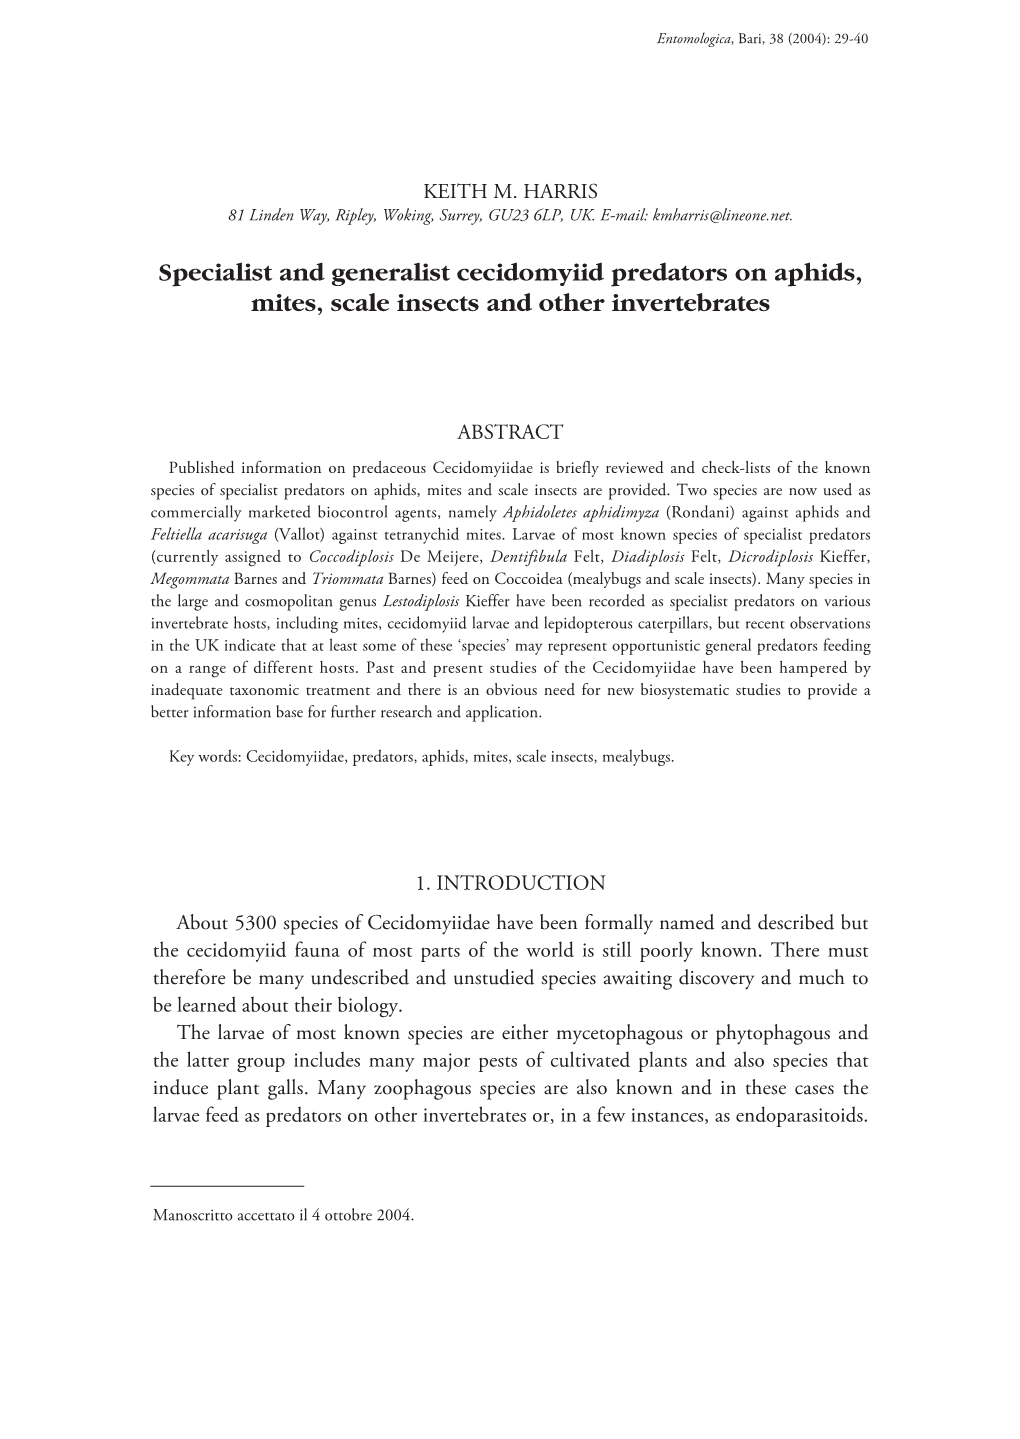 Specialist and Generalist Cecidomyiid Predators on Aphids, Mites, Scale Insects and Other Invertebrates